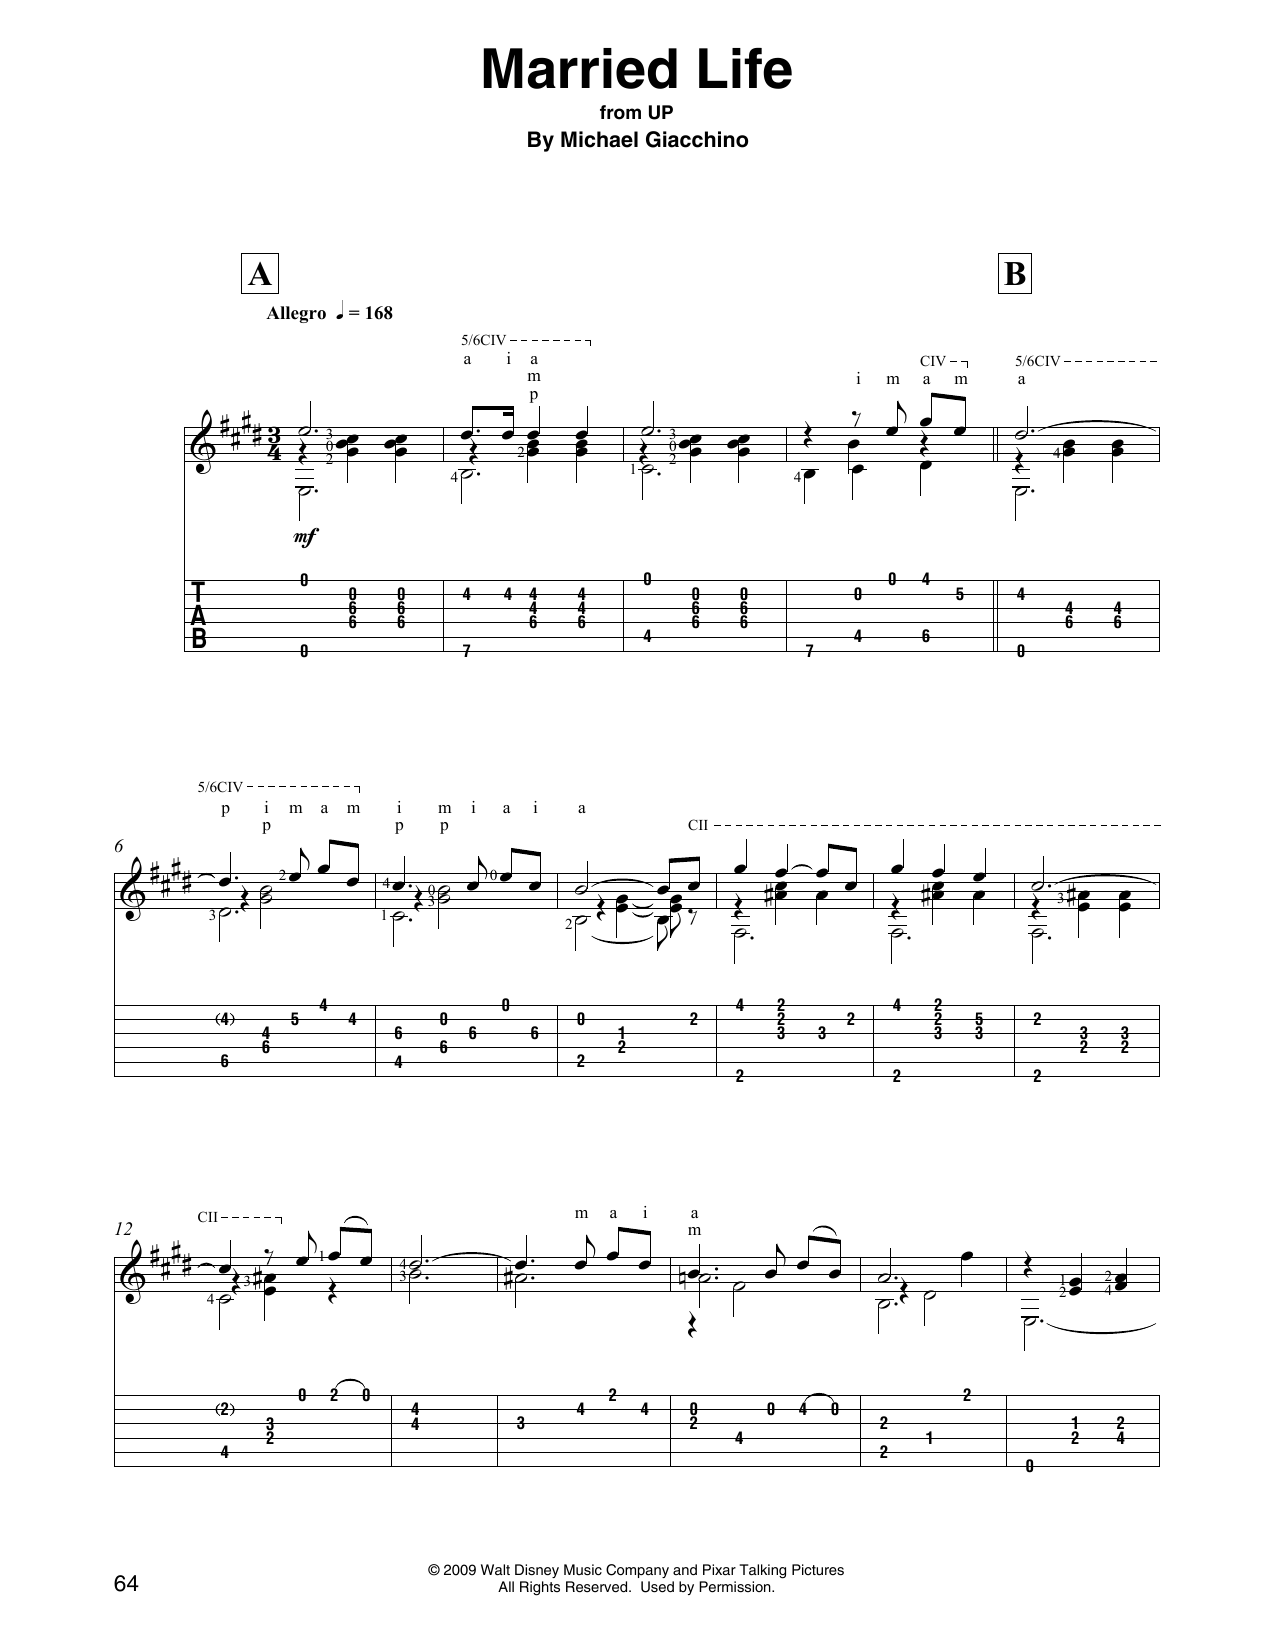 Michael Giacchino Married Life (from Up) sheet music notes printable PDF score